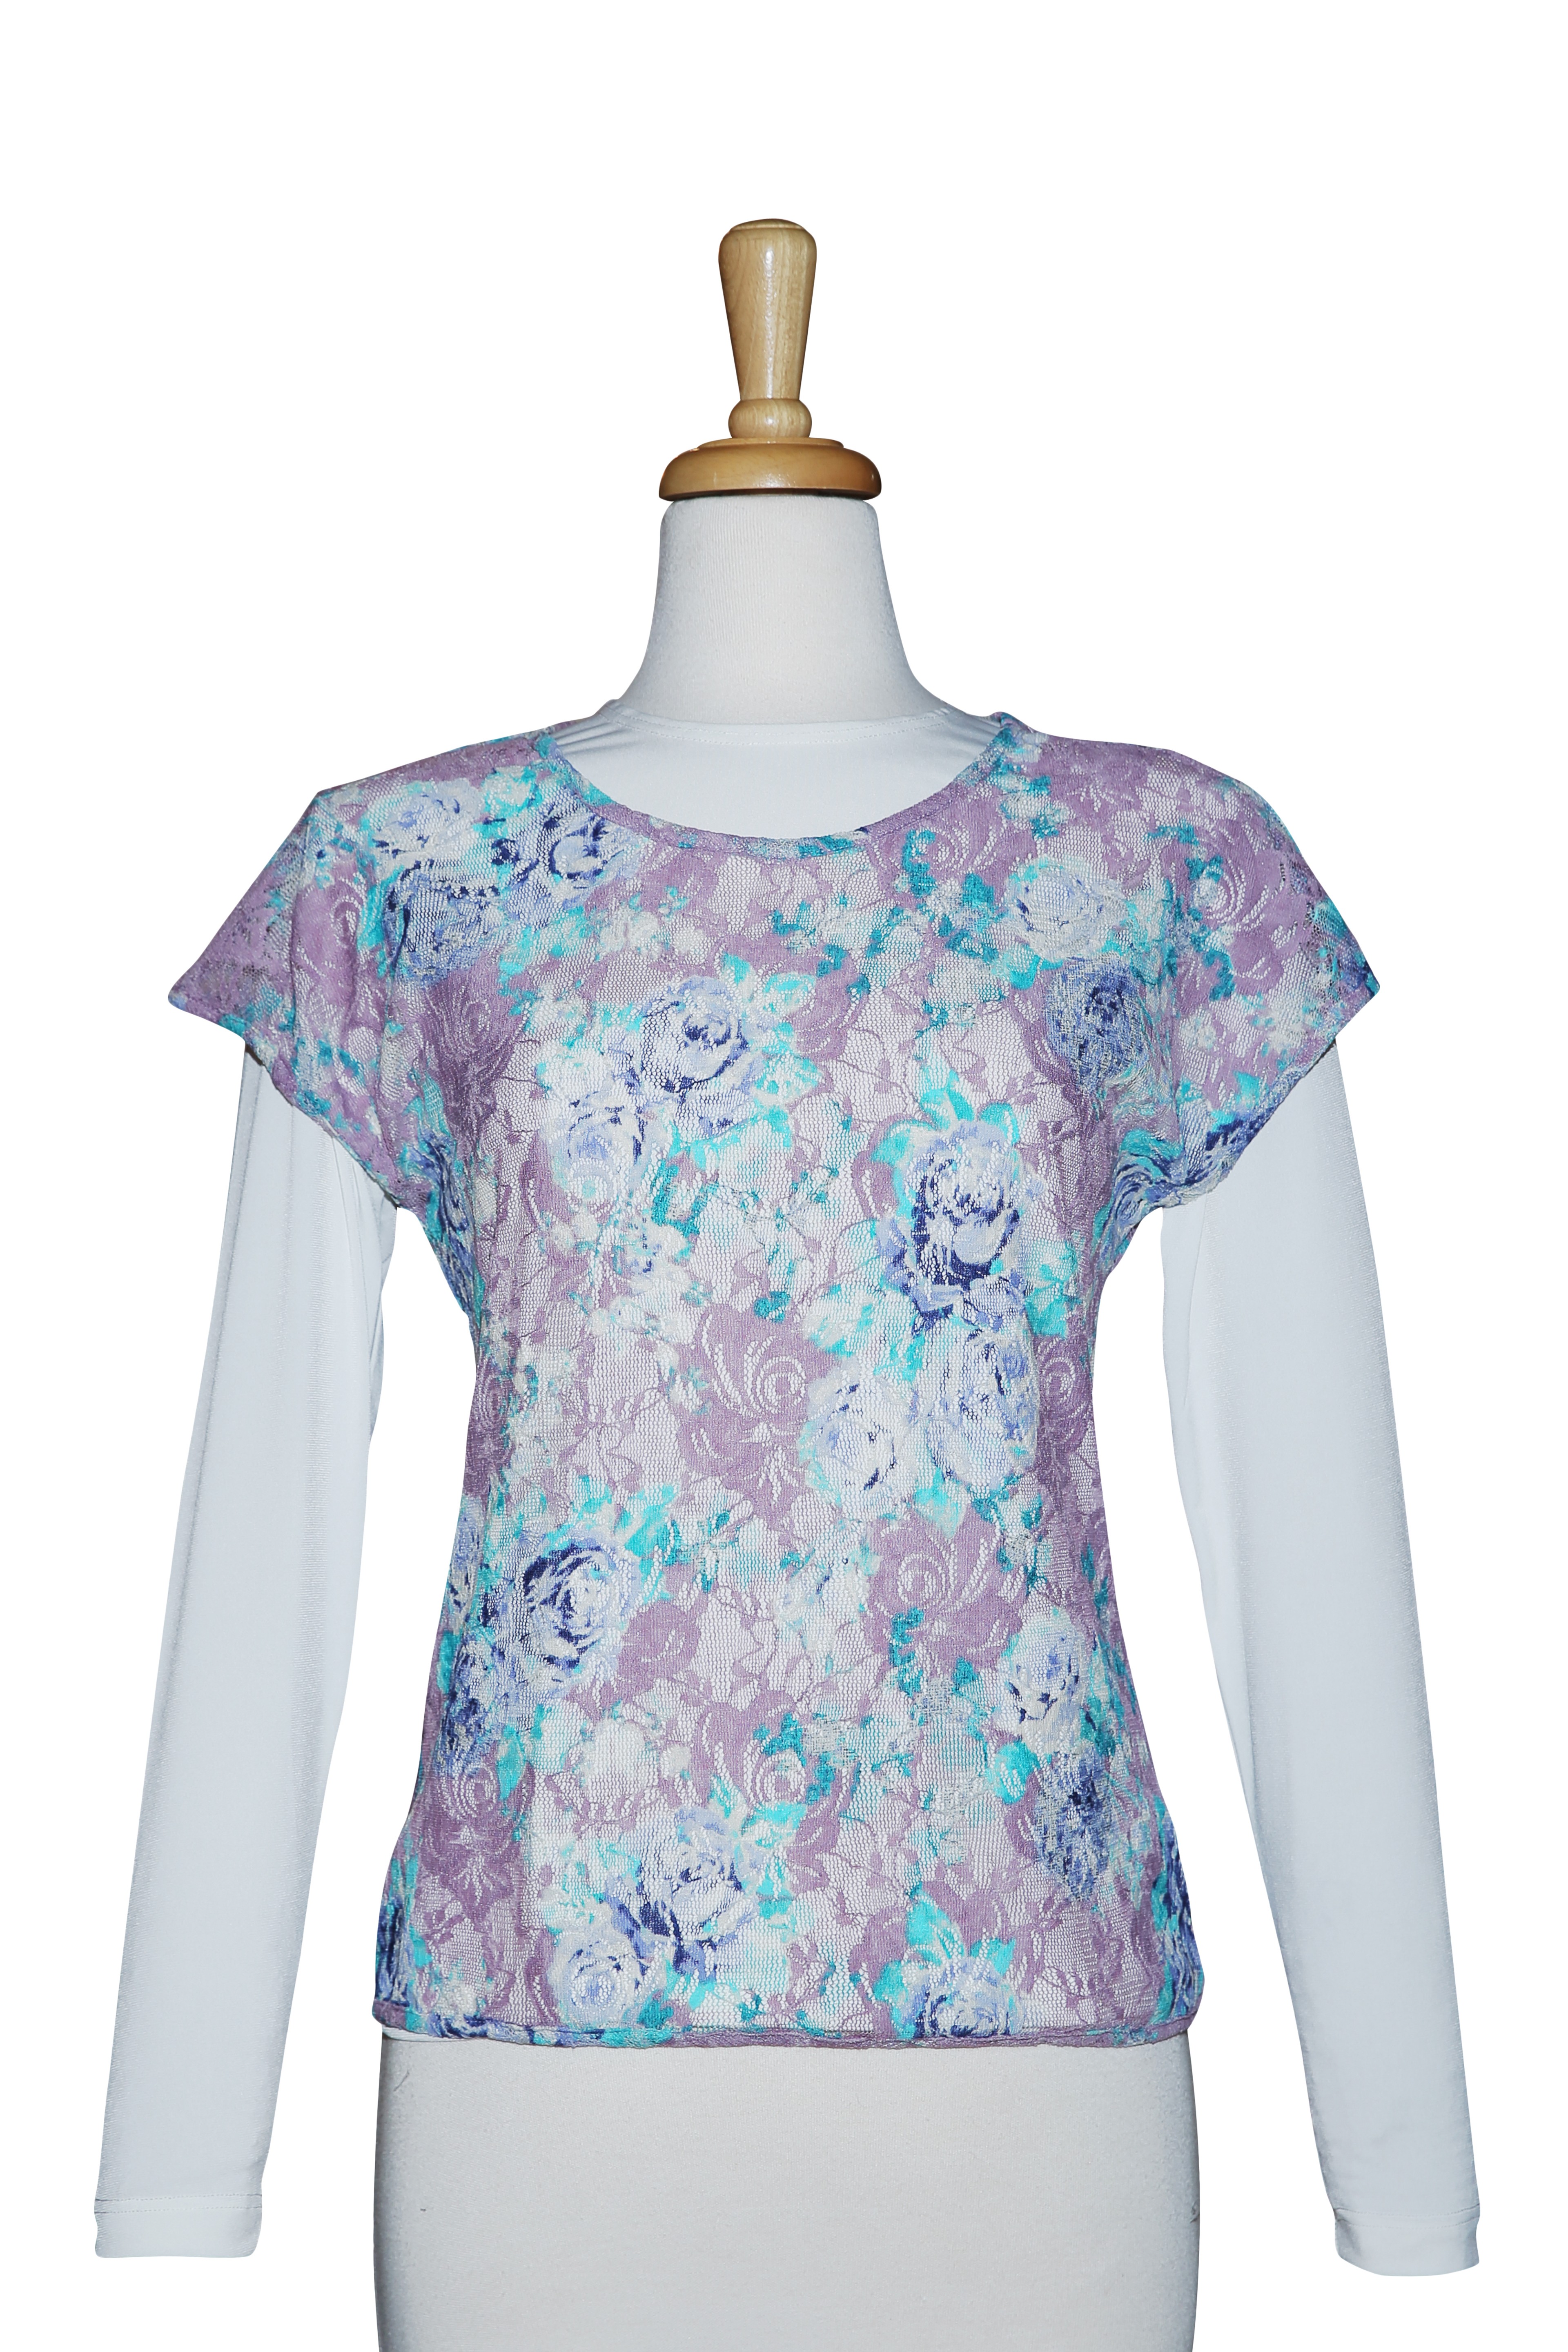 Mauve And Light Blue Lace Short Sleeve With Ivory Long Sleeve Top